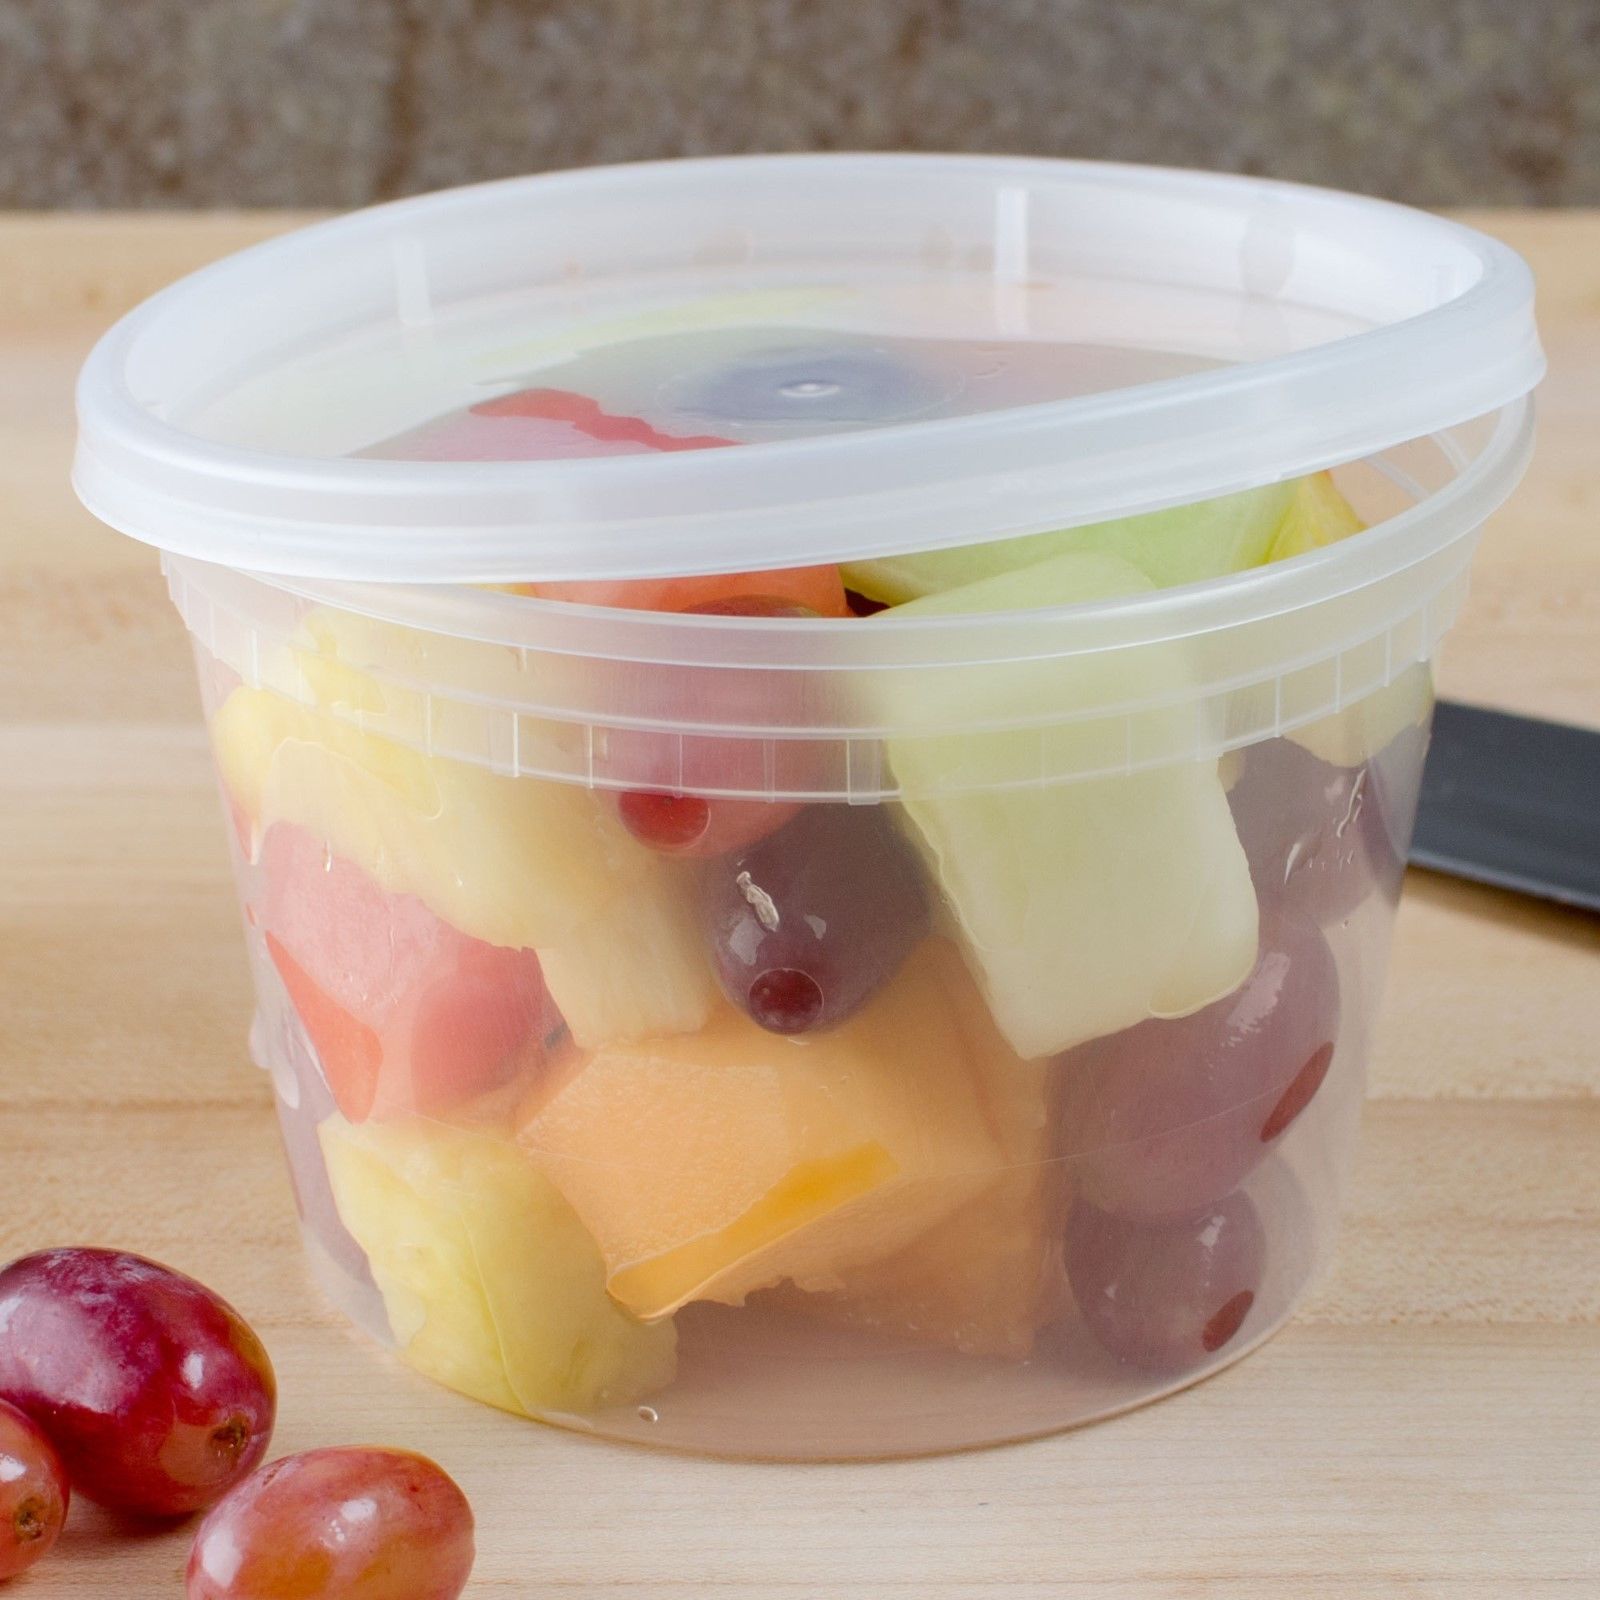 16oz Deli Cup Heavy Duty with Clear Lid